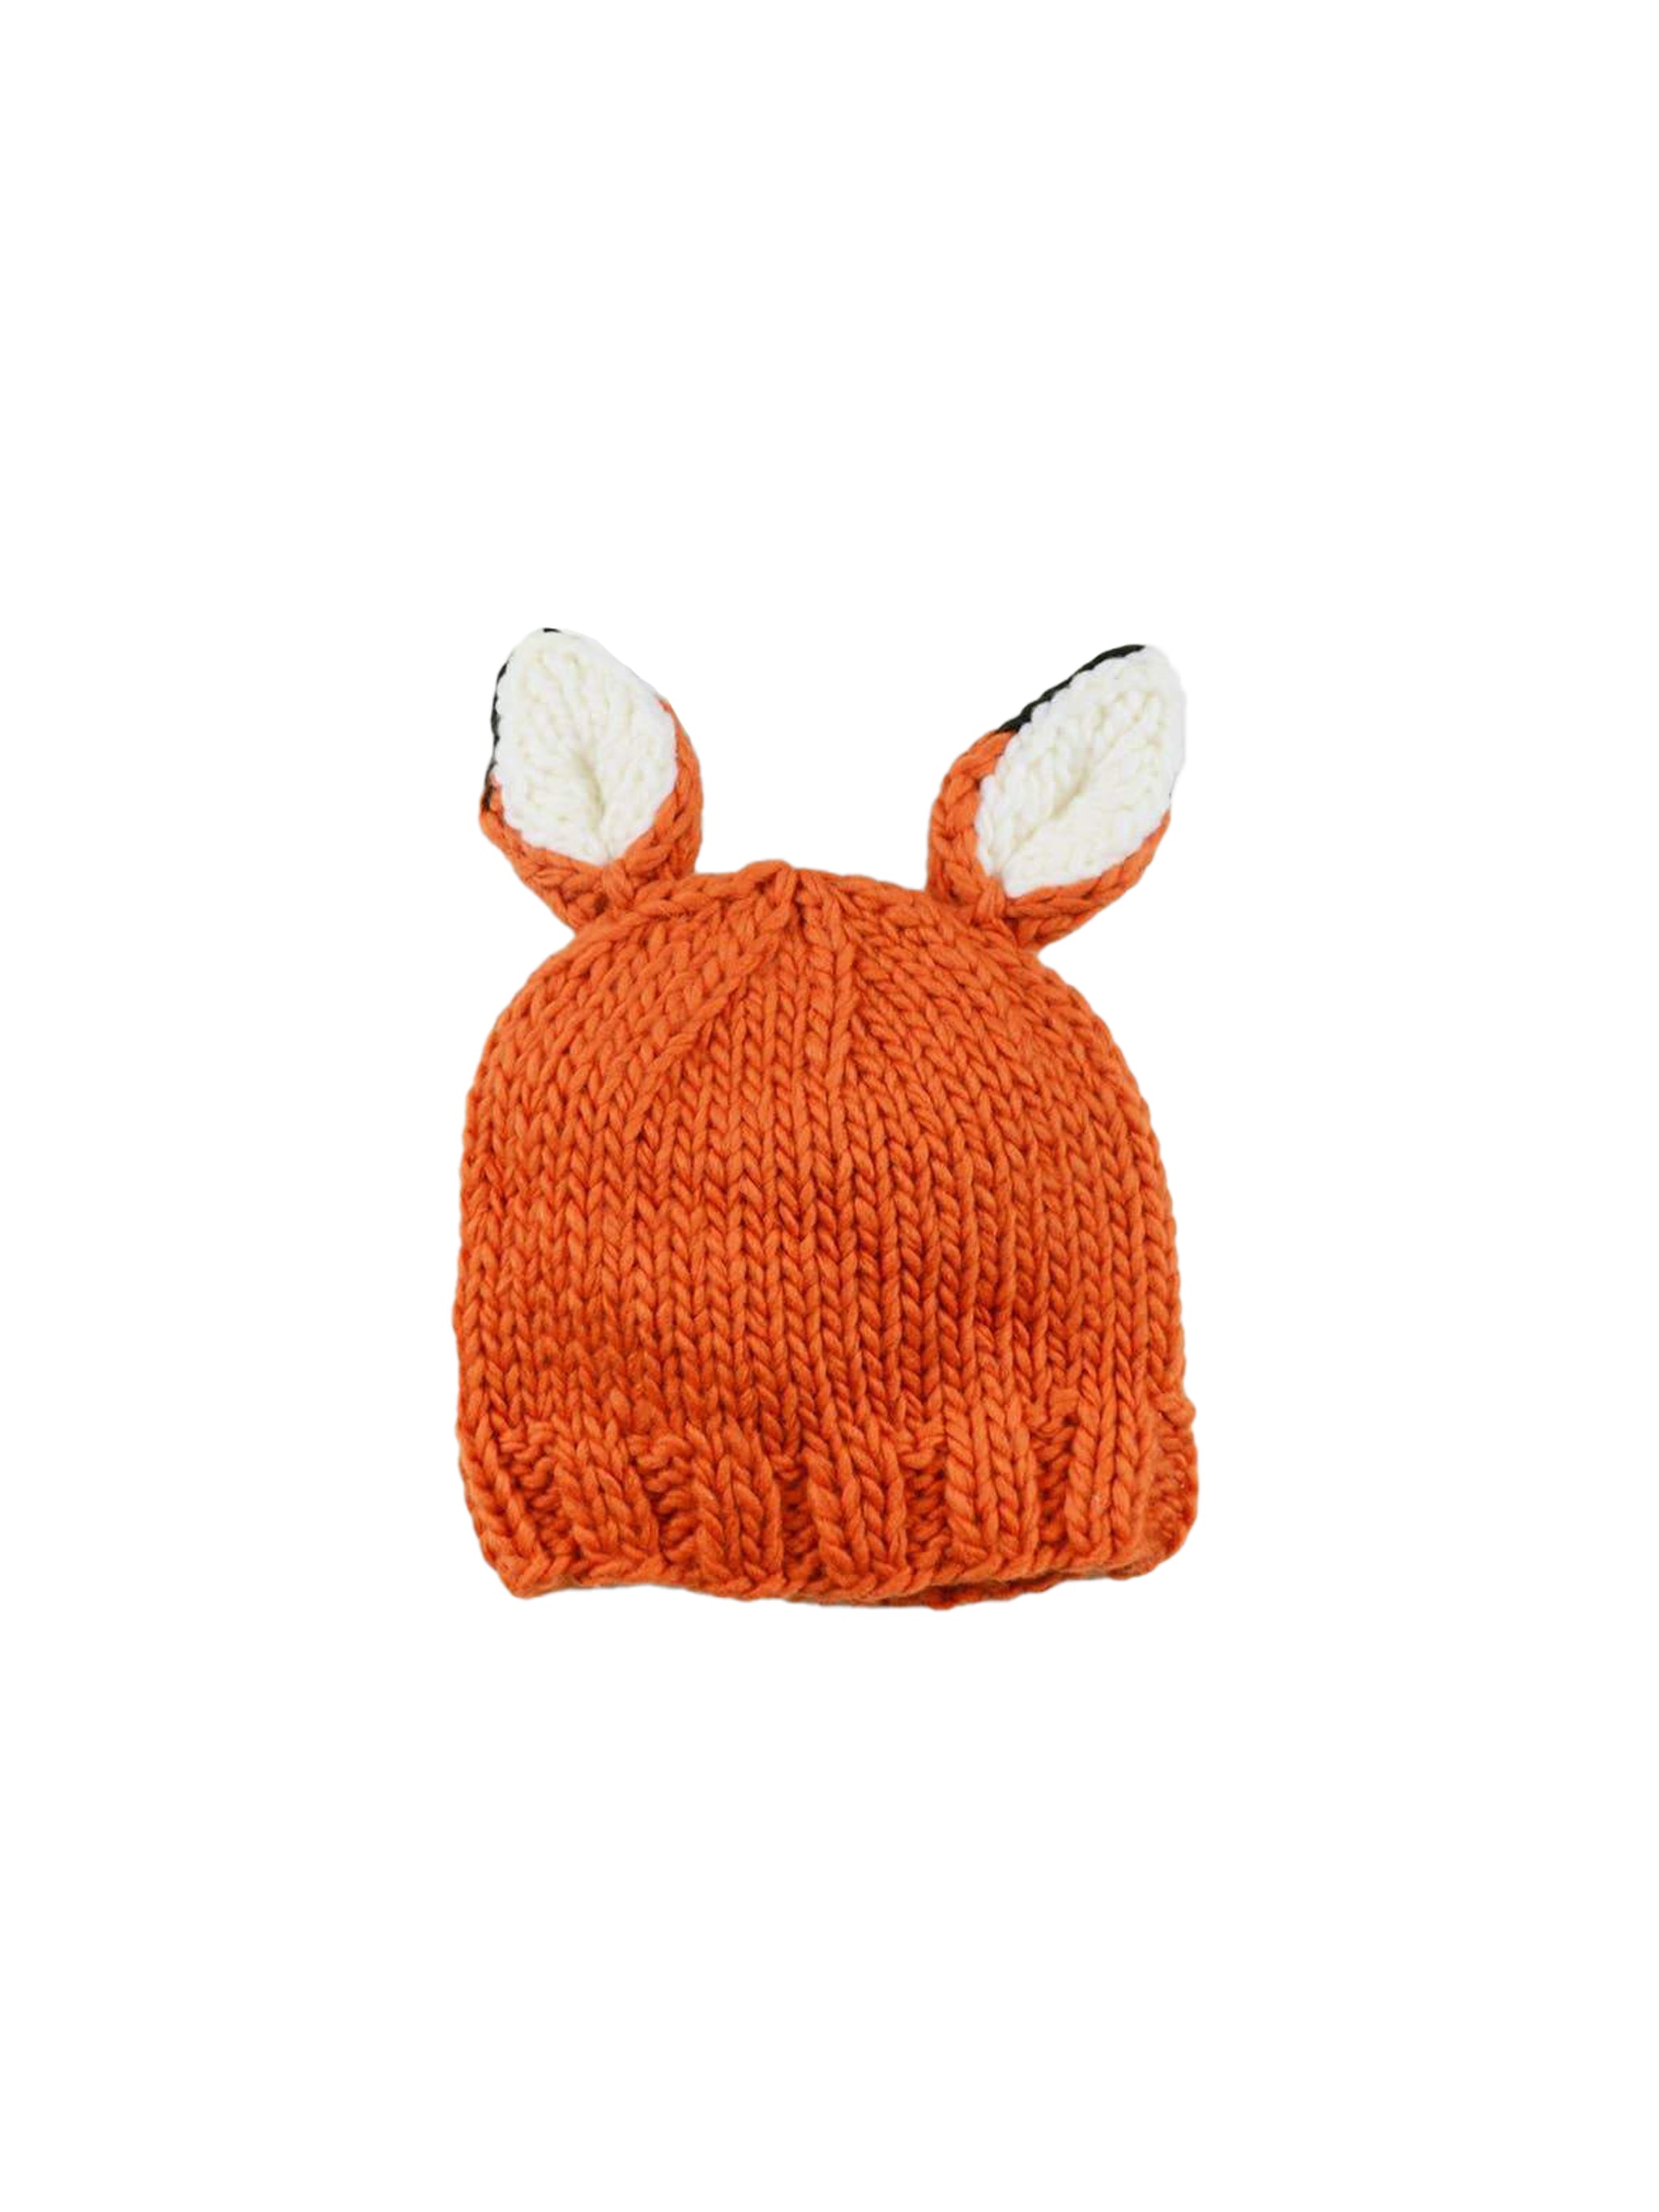 Shop the Rusty Fox Hand Knit Hat at Weston Table